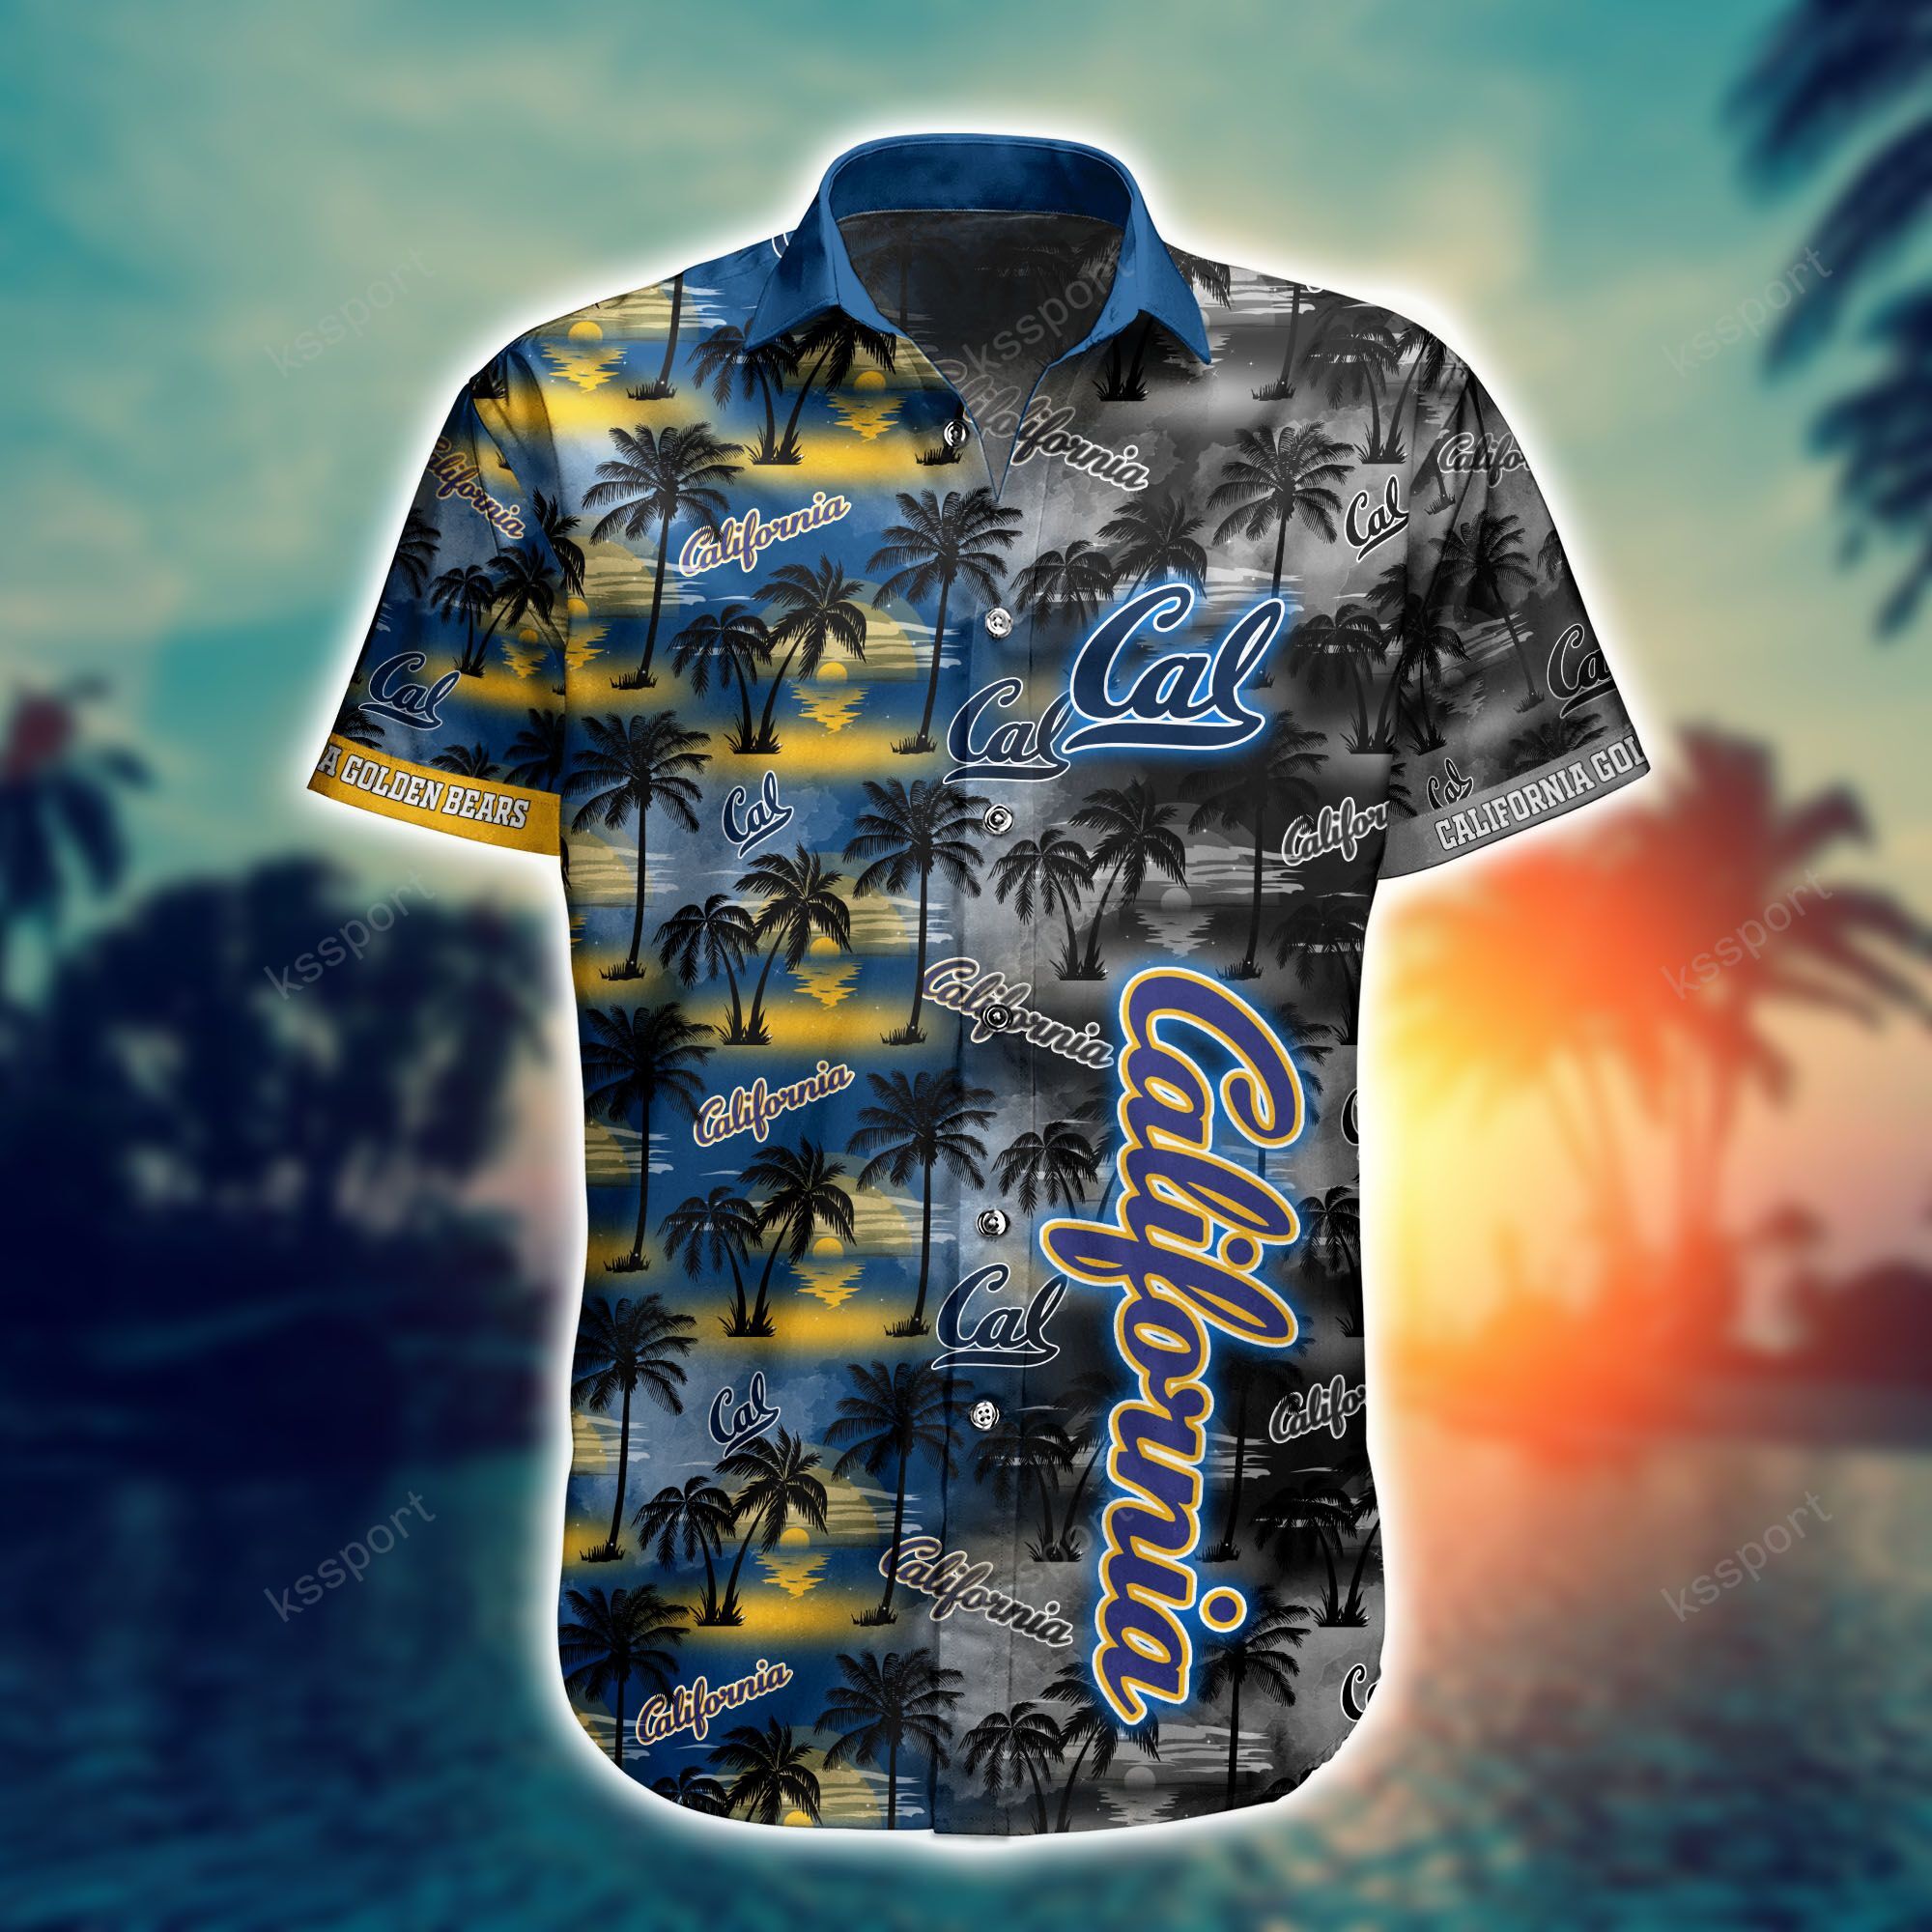 Top cool Hawaiian shirt 2022 - Make sure you get yours today before they run out! 109